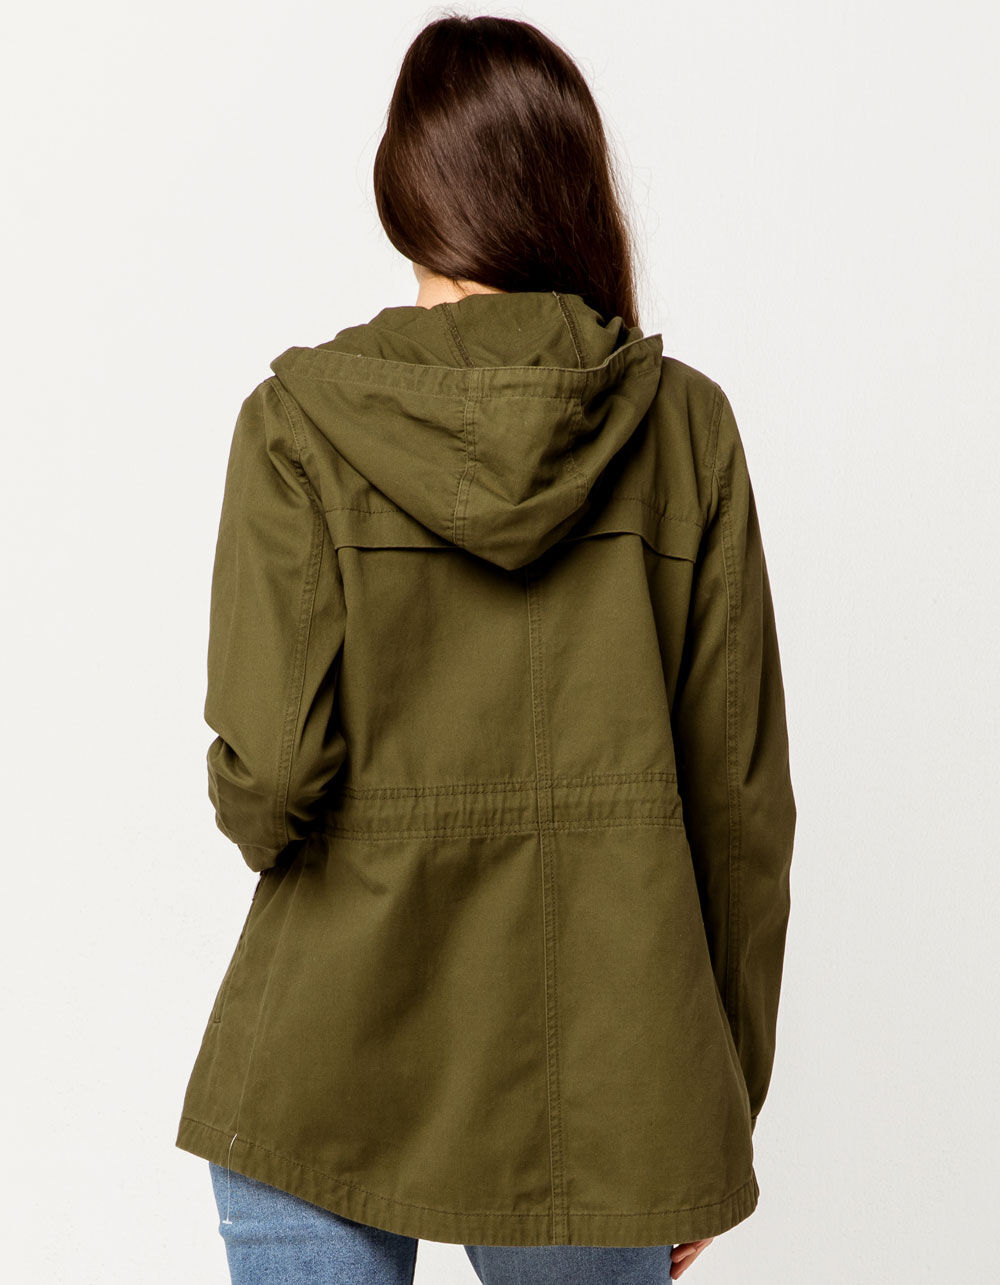 SKY AND SPARROW Womens Anorak Jacket - OLIVE | Tillys